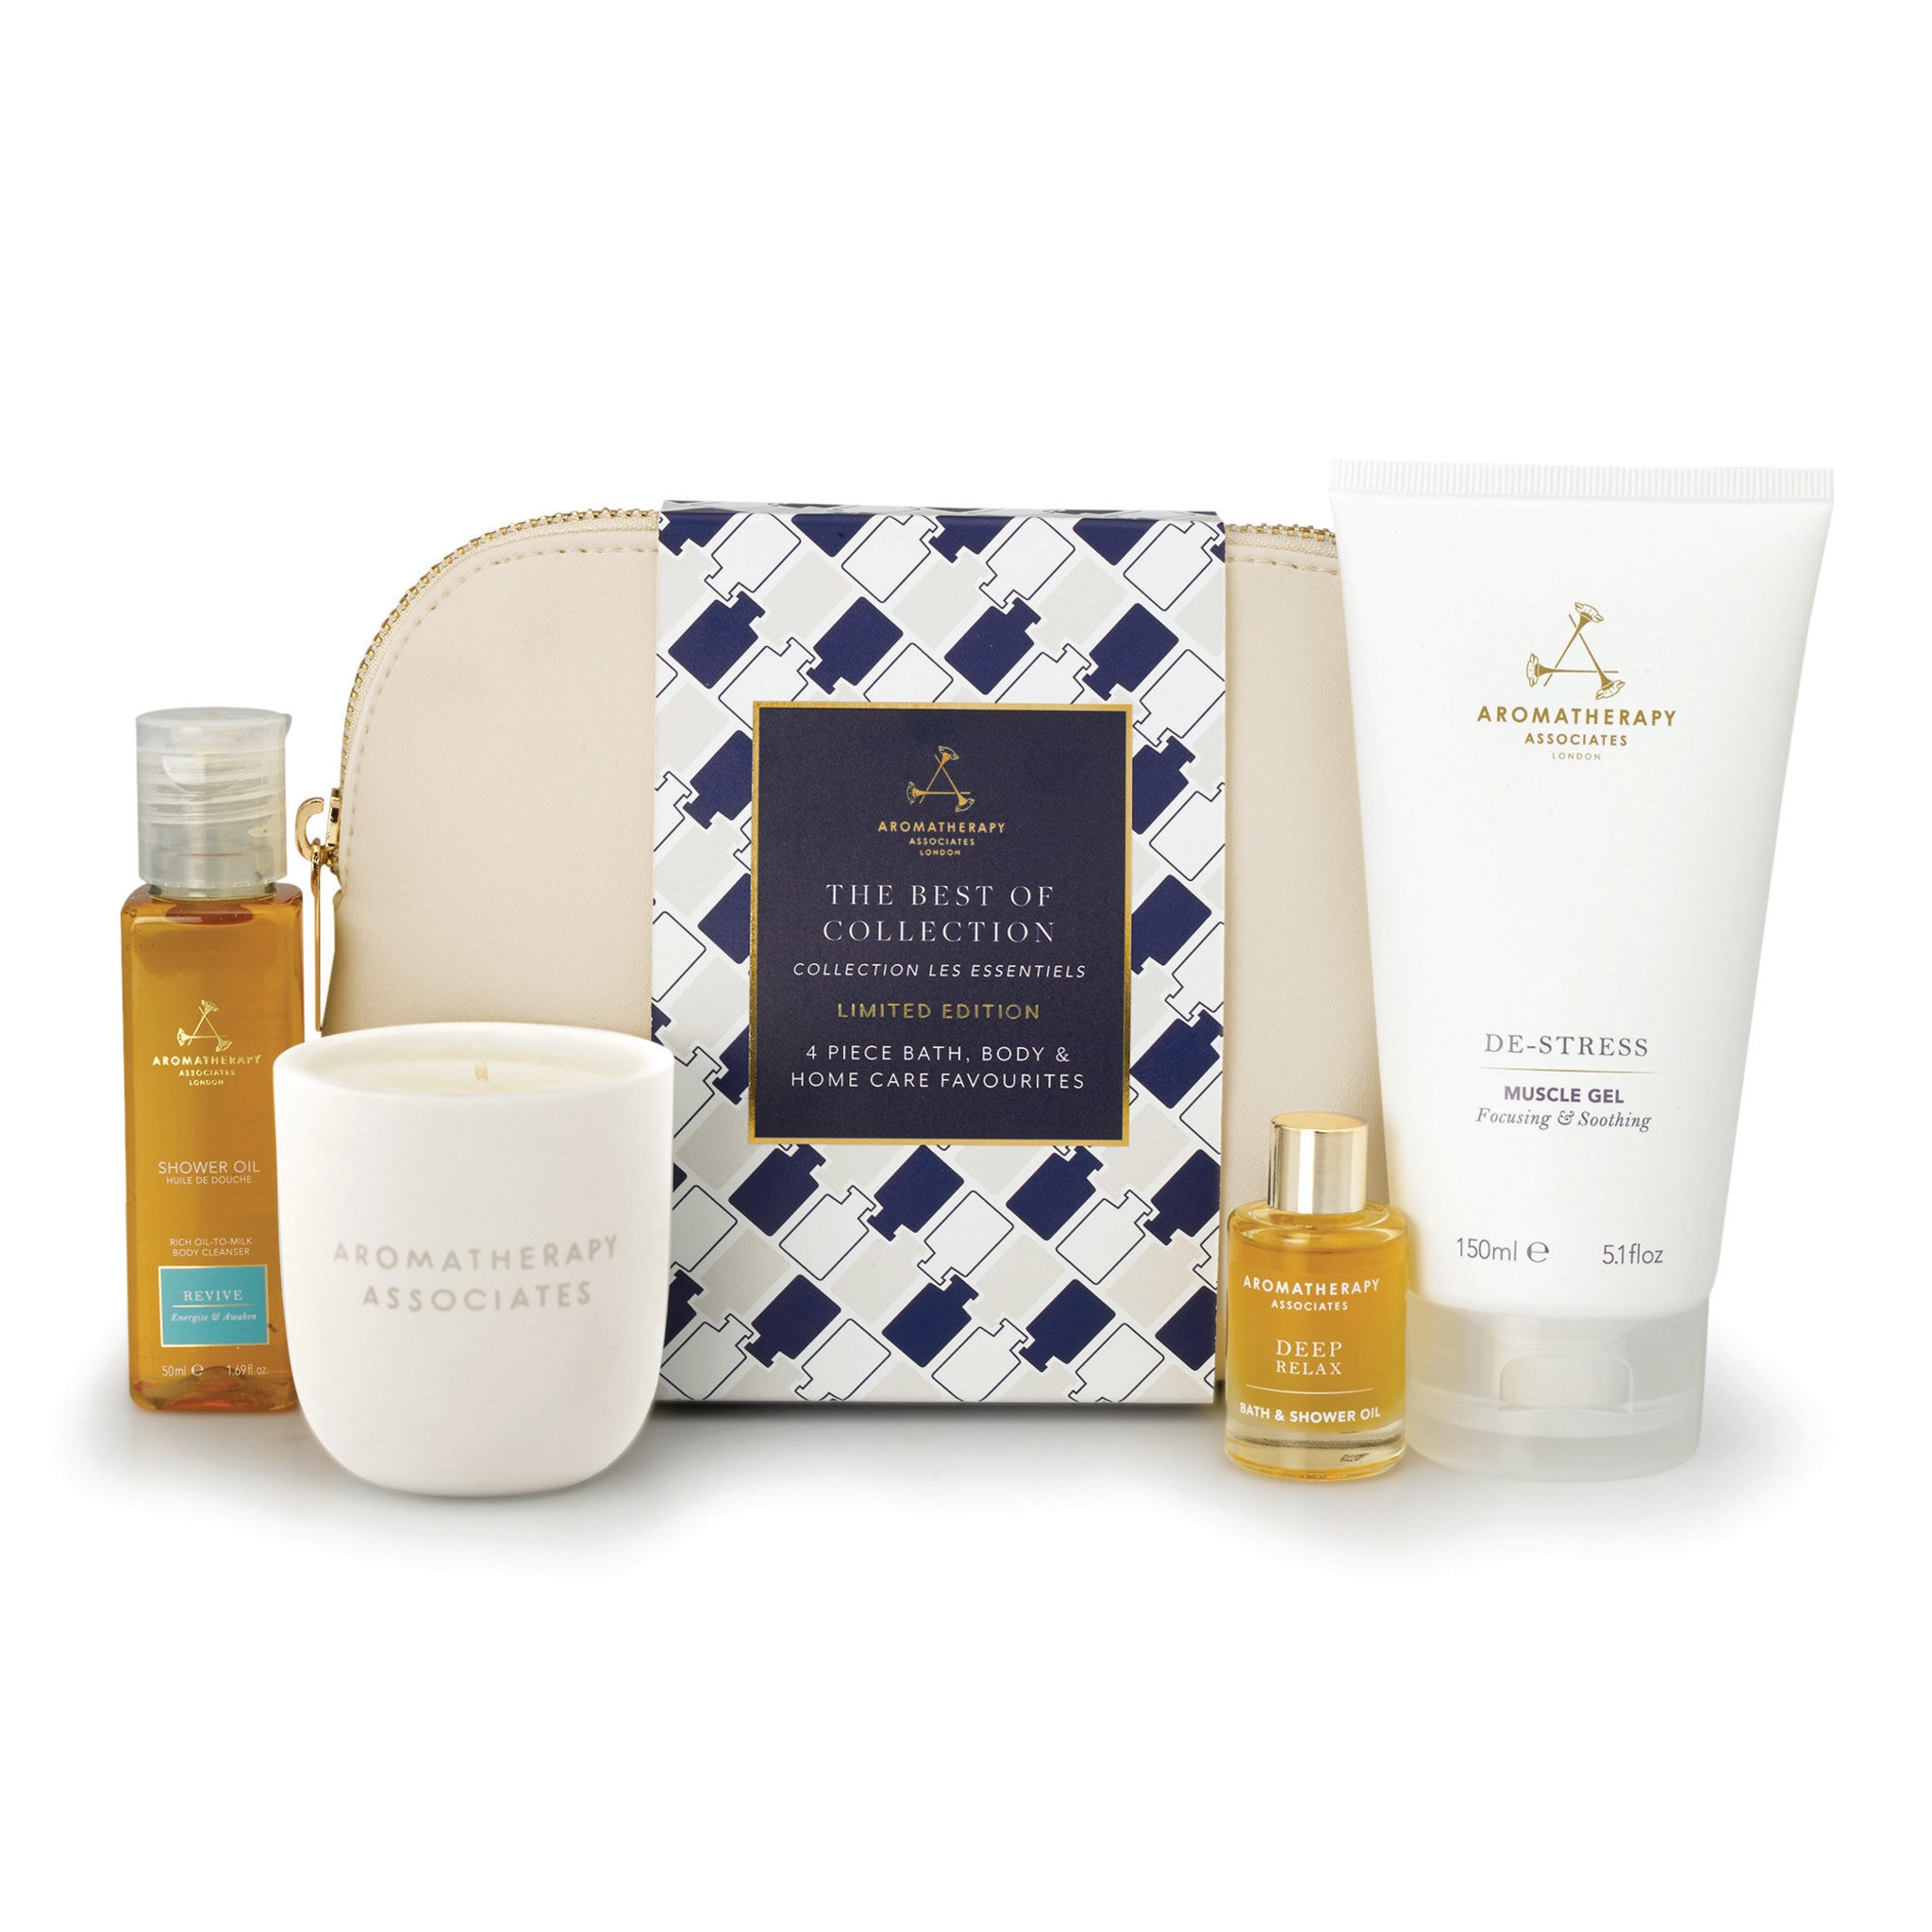 Aromatherapy Associates The Best Of Collection main image.